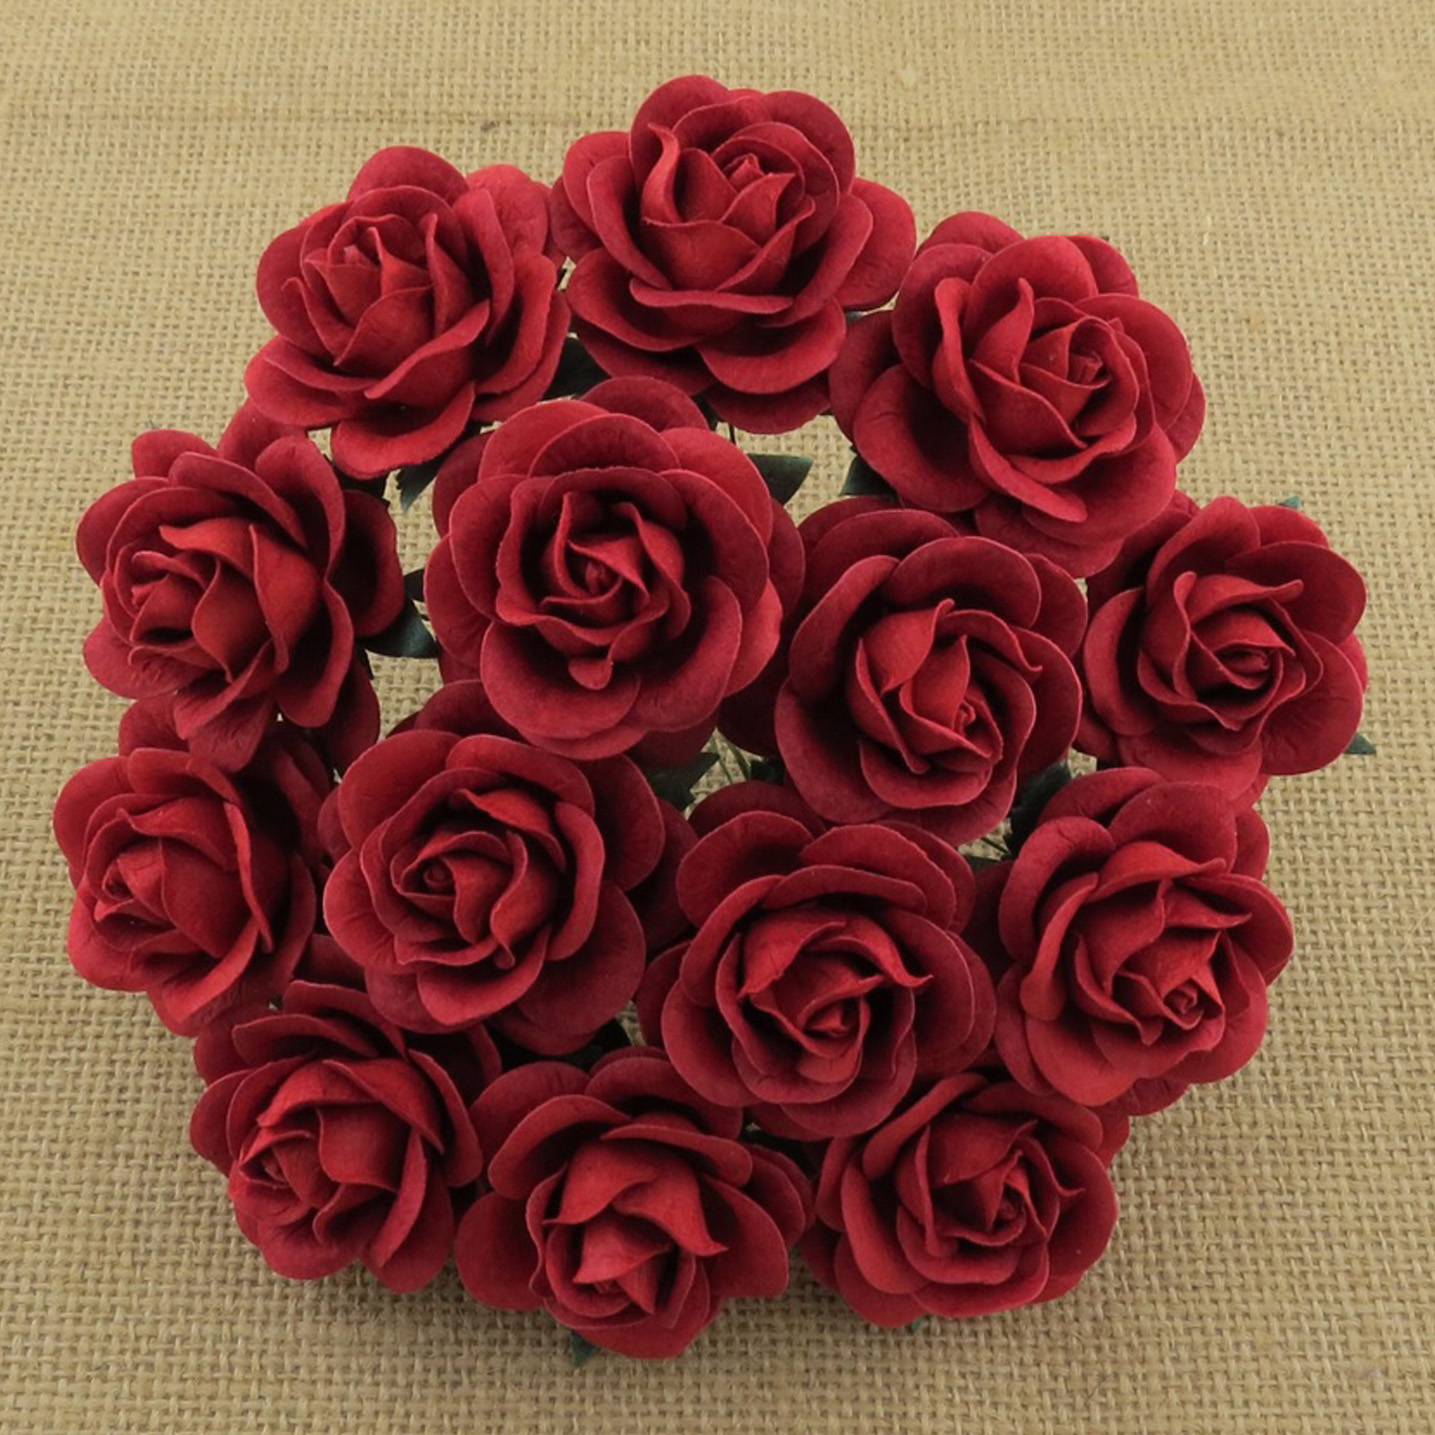 50 RED MULBERRY PAPER TRELLIS ROSES